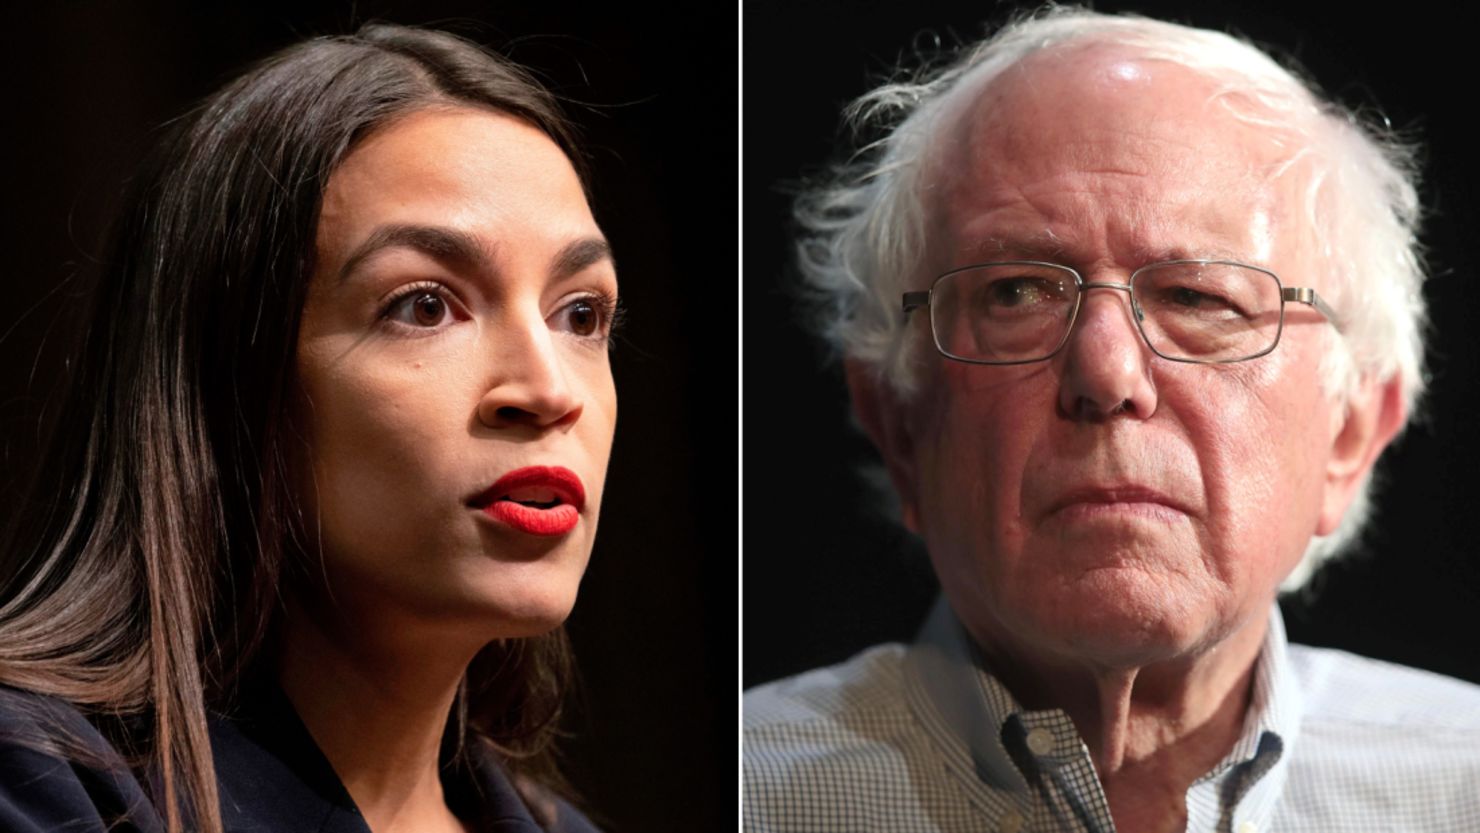 Aoc And Sanders Credit Card Interest Rate Cap Would Be Disastrous Cnn Business 7707